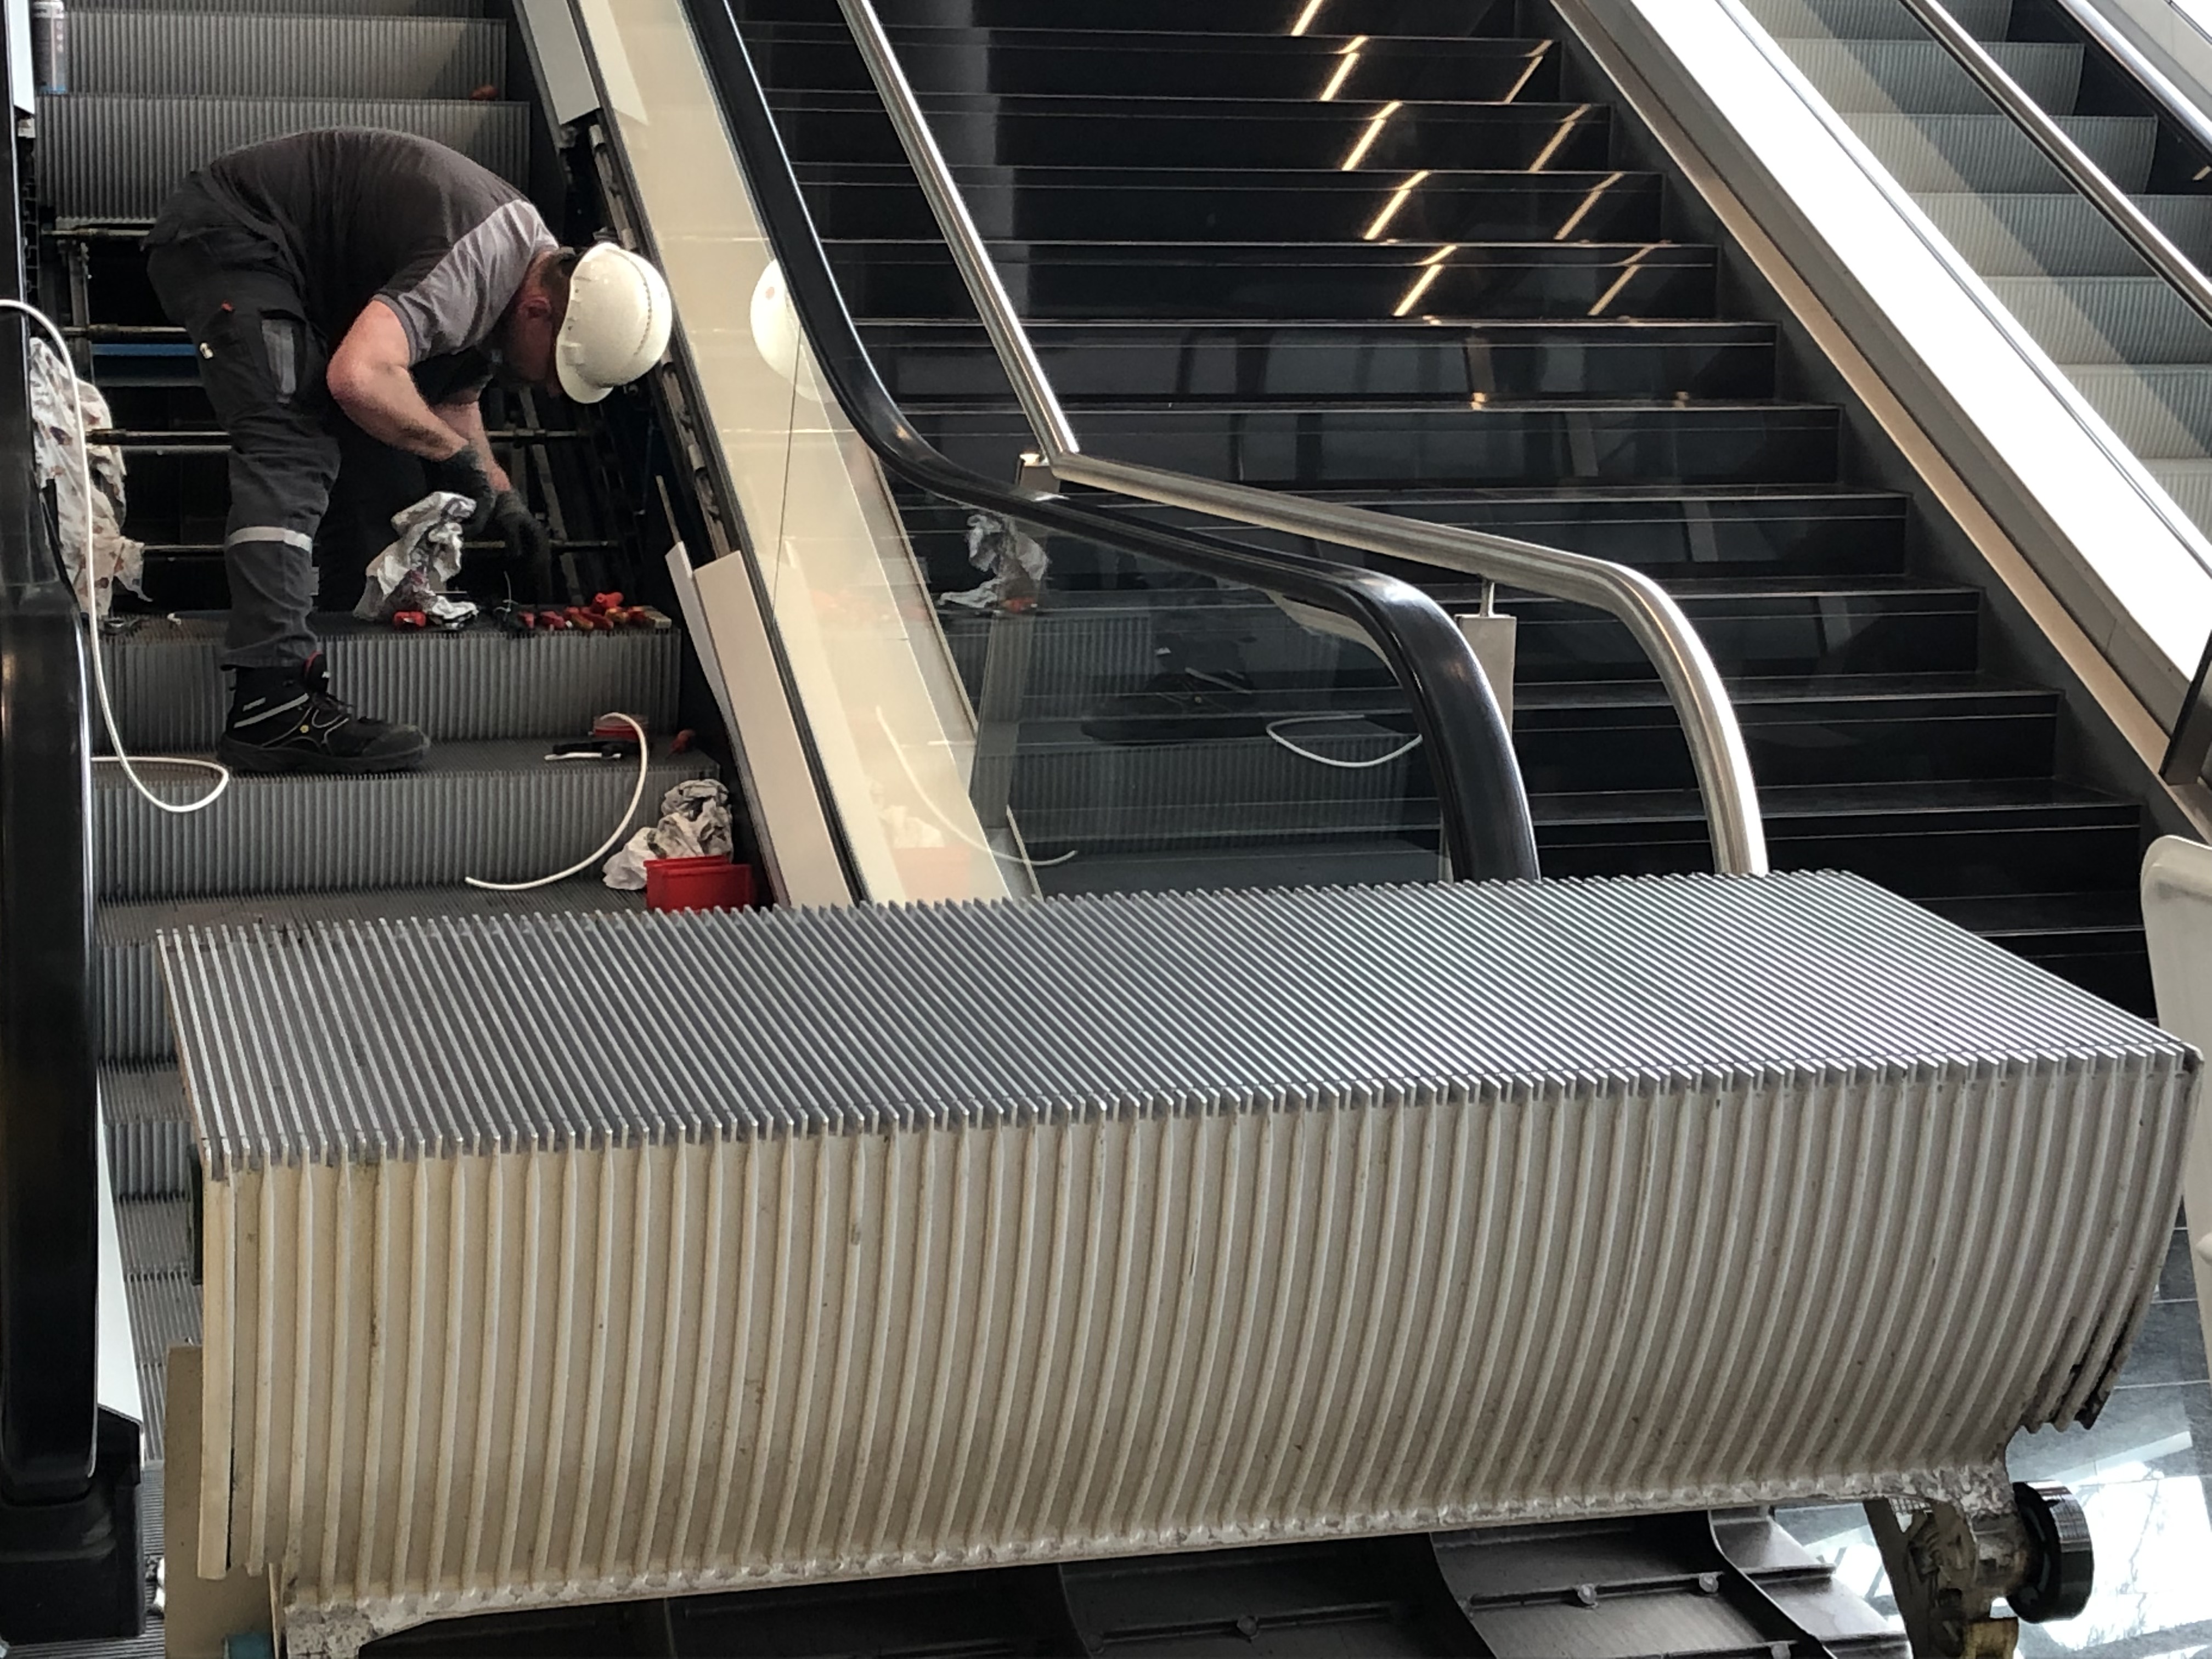 Installation works in the staircase area of escalators in the Congress Center Messe Messe Frankfurt (CMF) 2022.